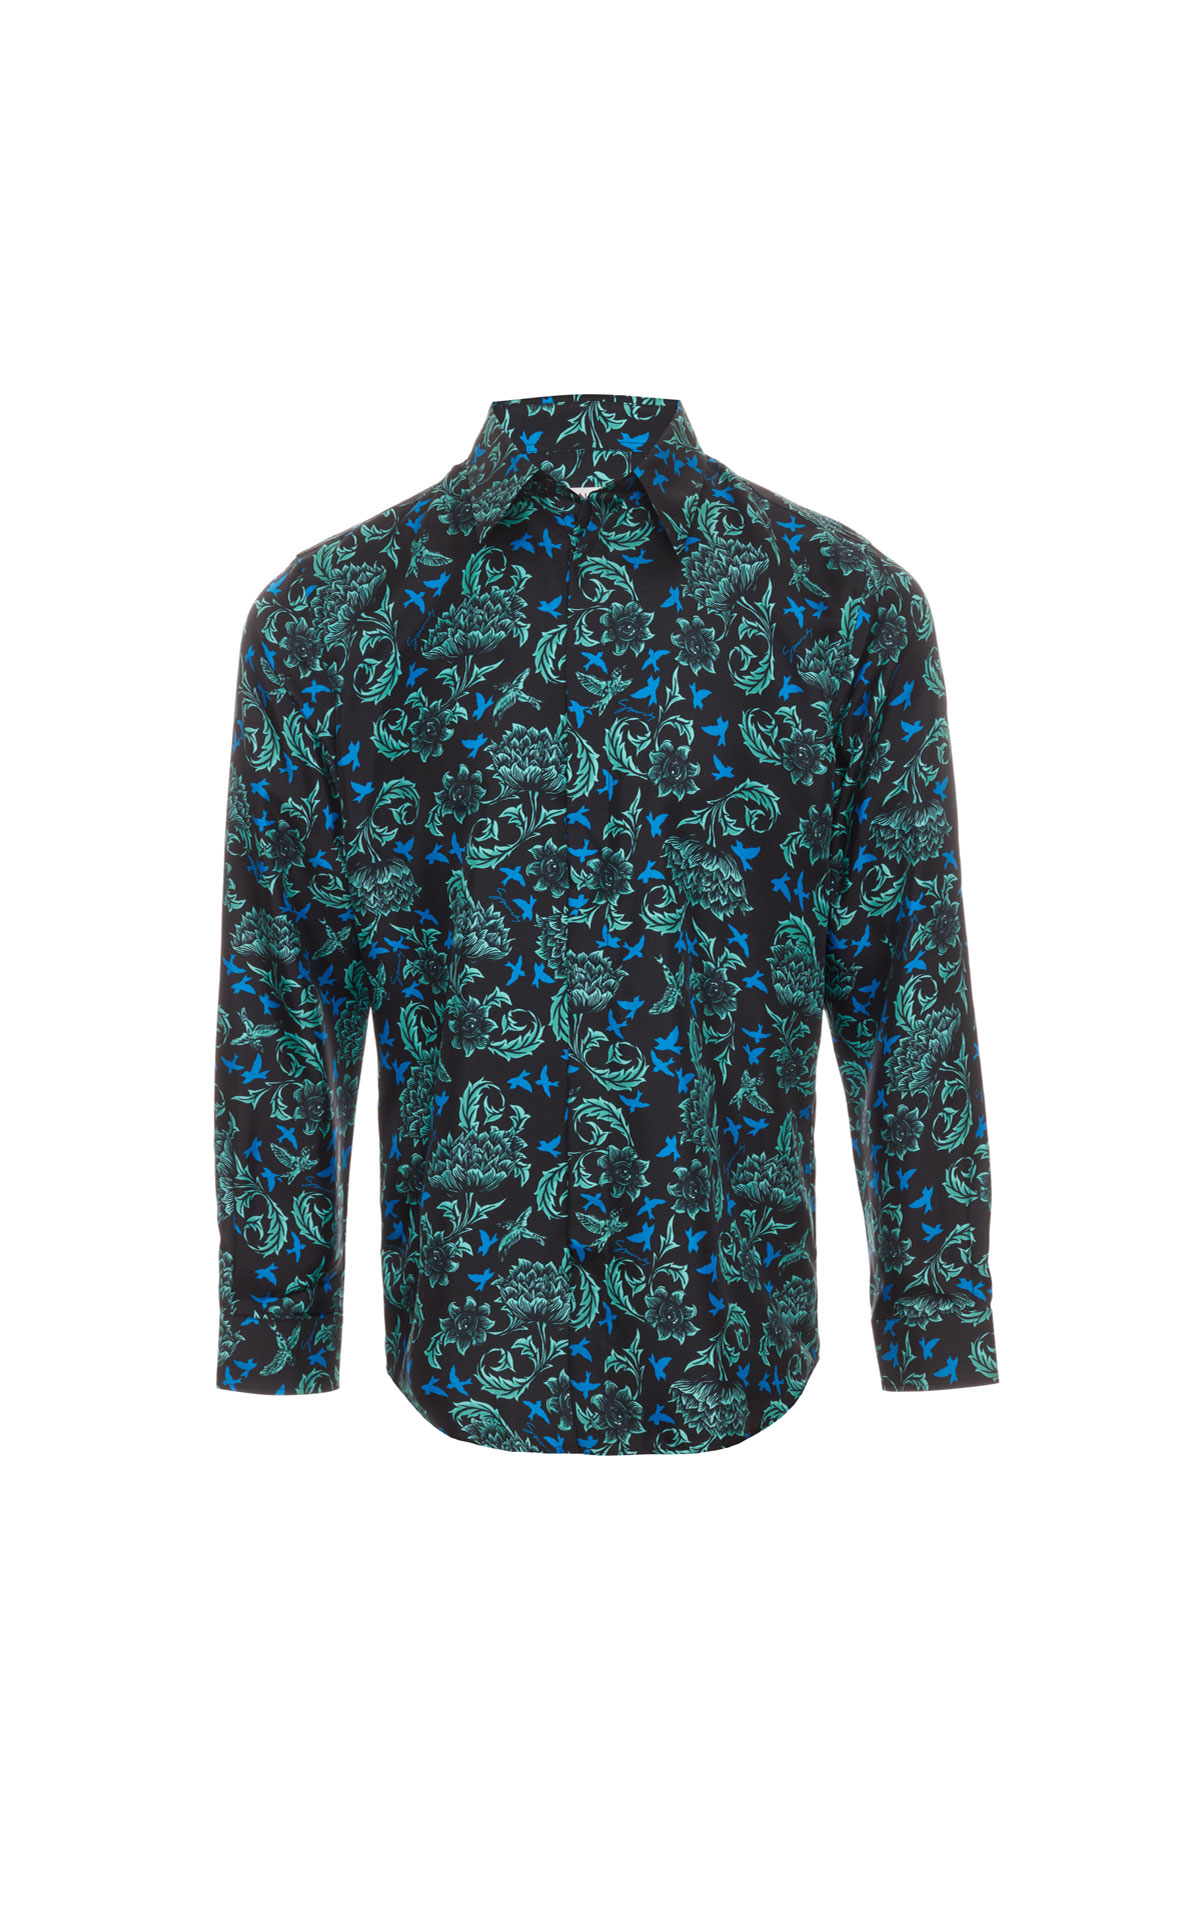 Givenchy Black, blue and green floral shirt from Bicester Village